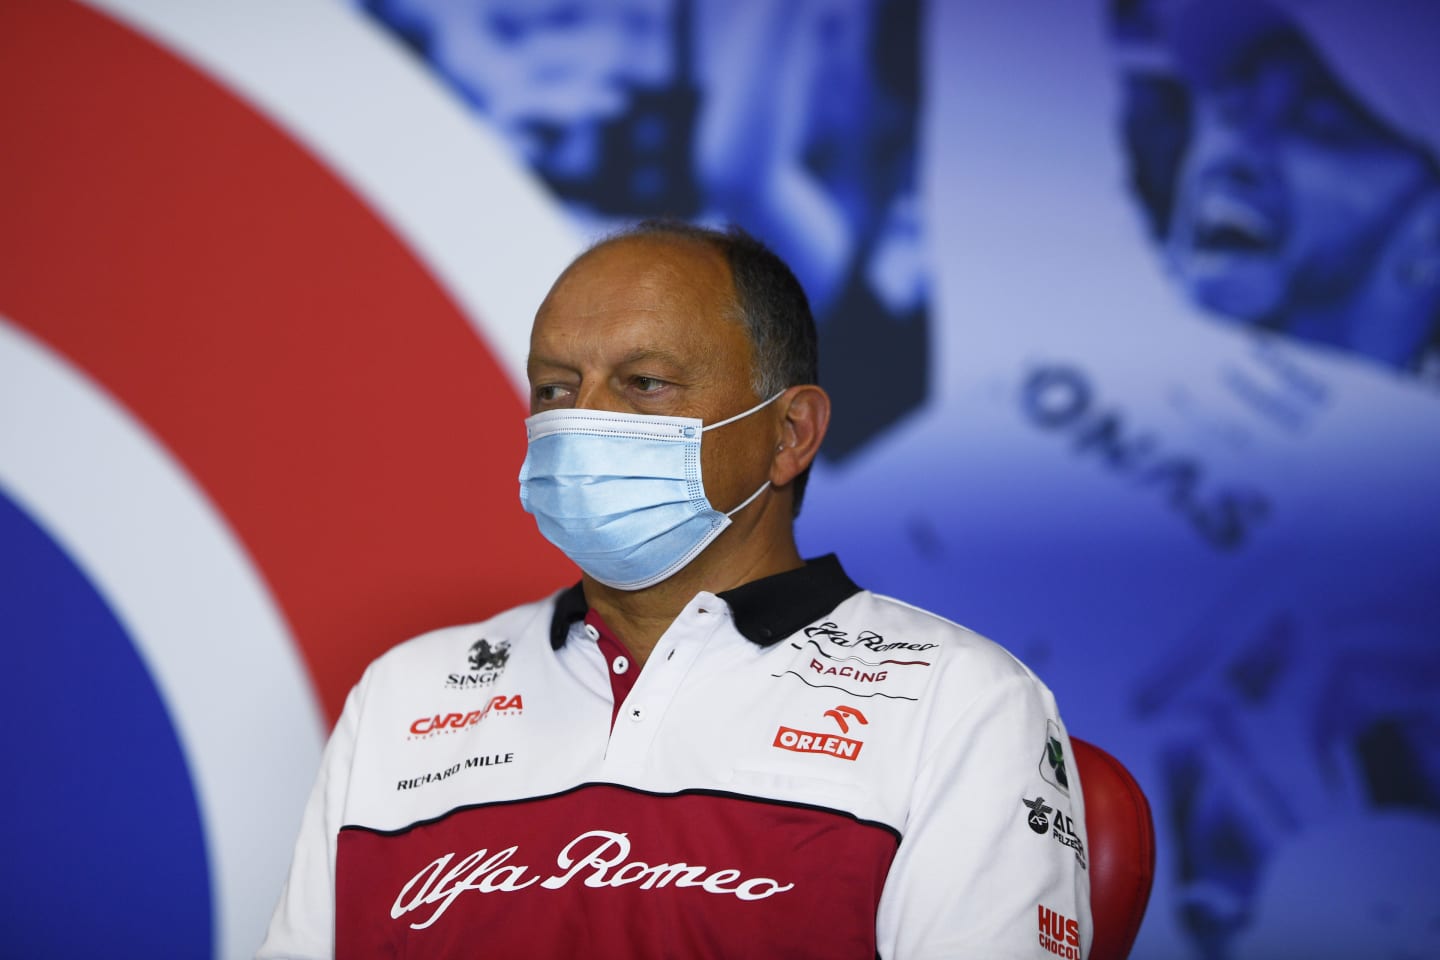 NORTHAMPTON, ENGLAND - AUGUST 07: Alfa Romeo Racing Team Principal Frederic Vasseur talks in the Team Principals Press Conference during practice for the F1 70th Anniversary Grand Prix at Silverstone on August 07, 2020 in Northampton, England. (Photo by Rudy Carezzevoli/Getty Images)